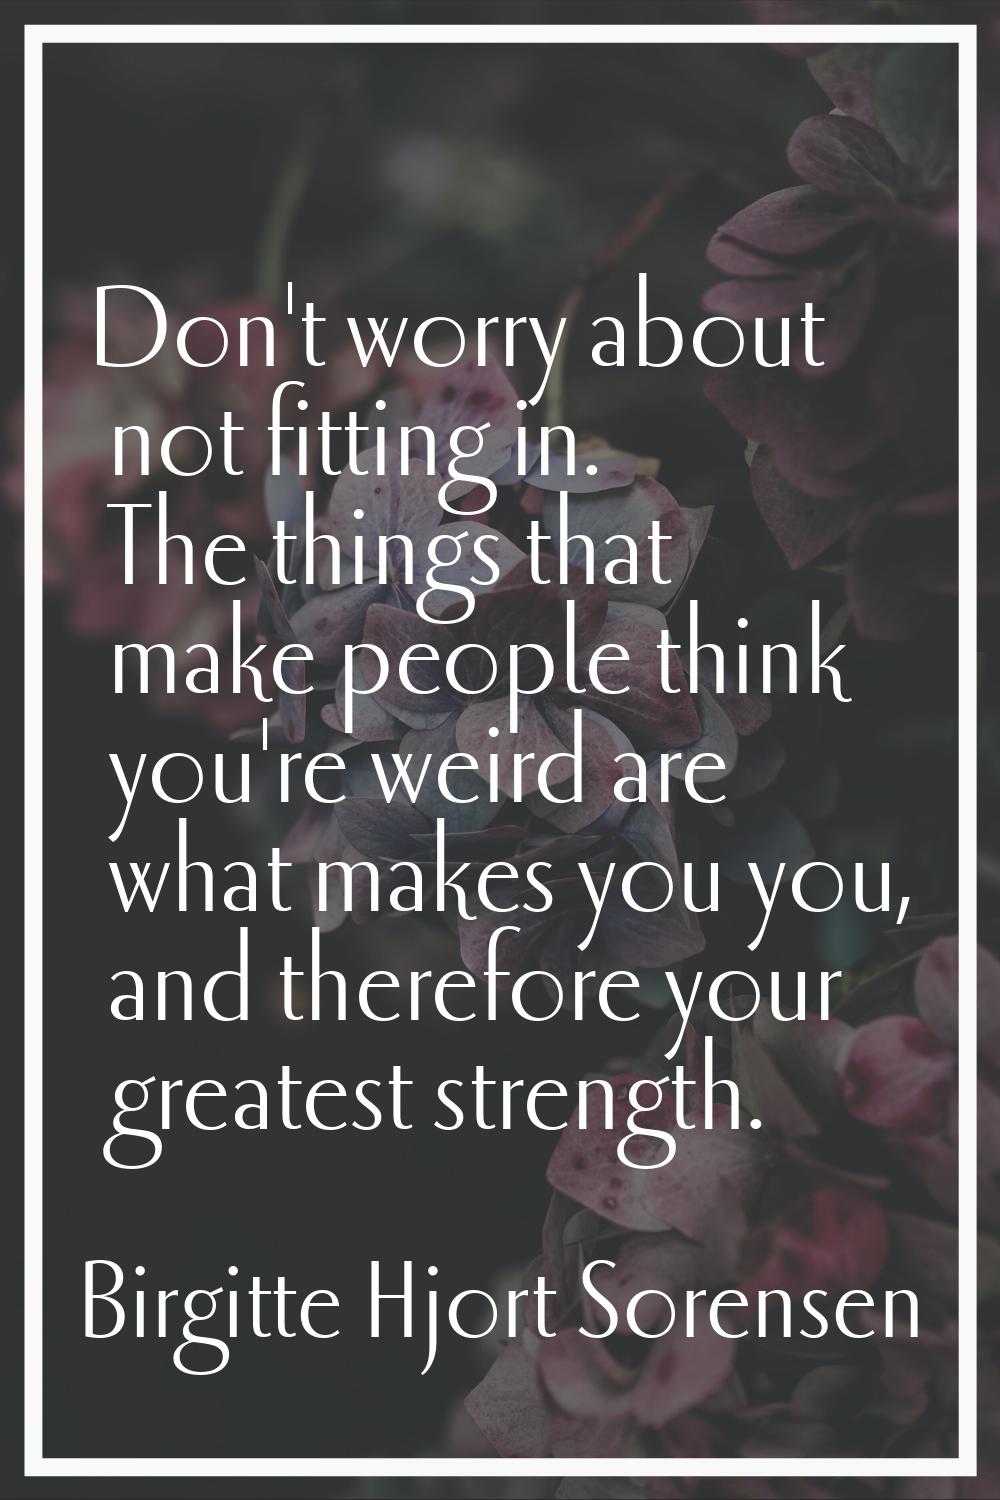 Don't worry about not fitting in. The things that make people think you're weird are what makes you